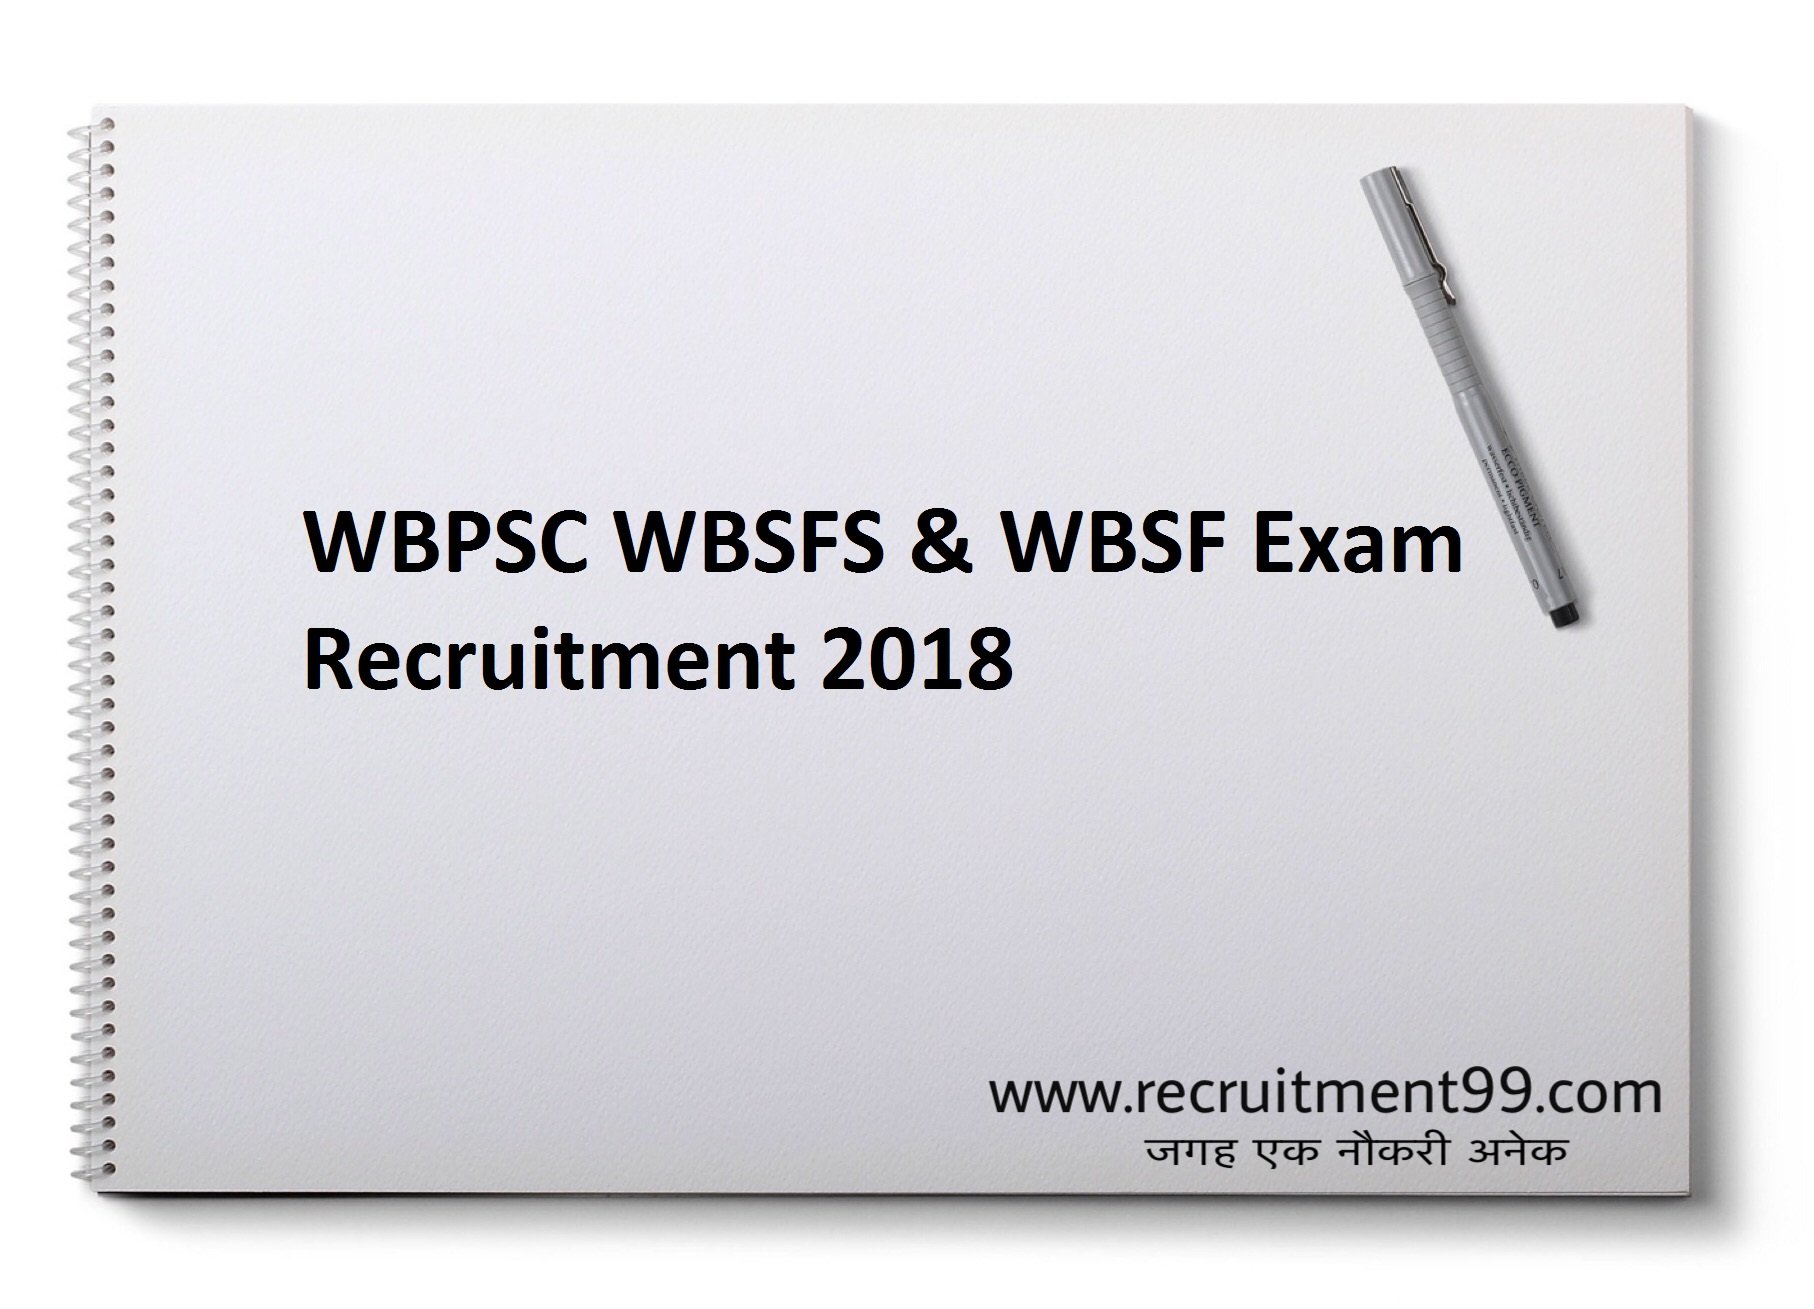 WBPSC WBSFS & WBSF Exam Recruitment Admit Card Result 2018